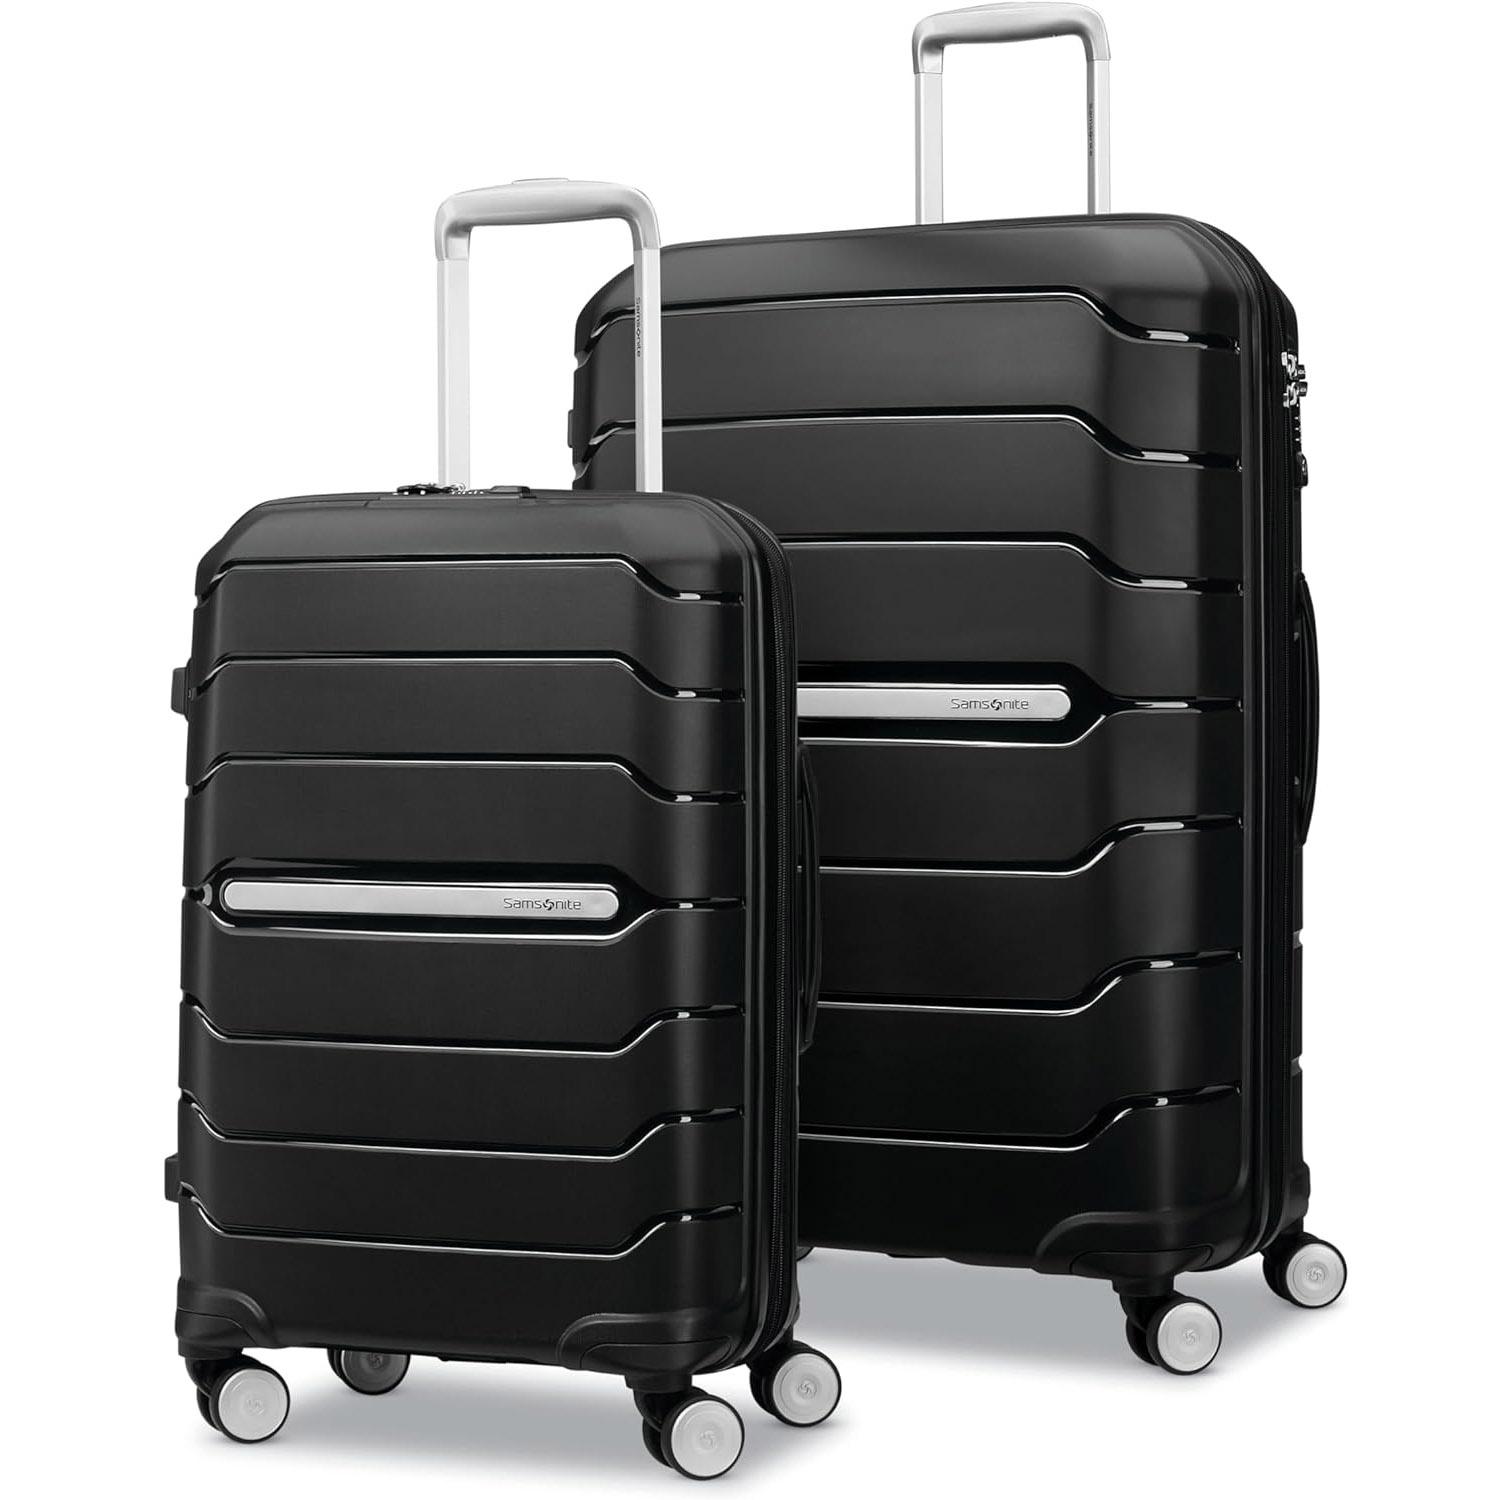 Samsonite Freeform Hardside Expandable Luggage with Spinners for $219.81 Shipped